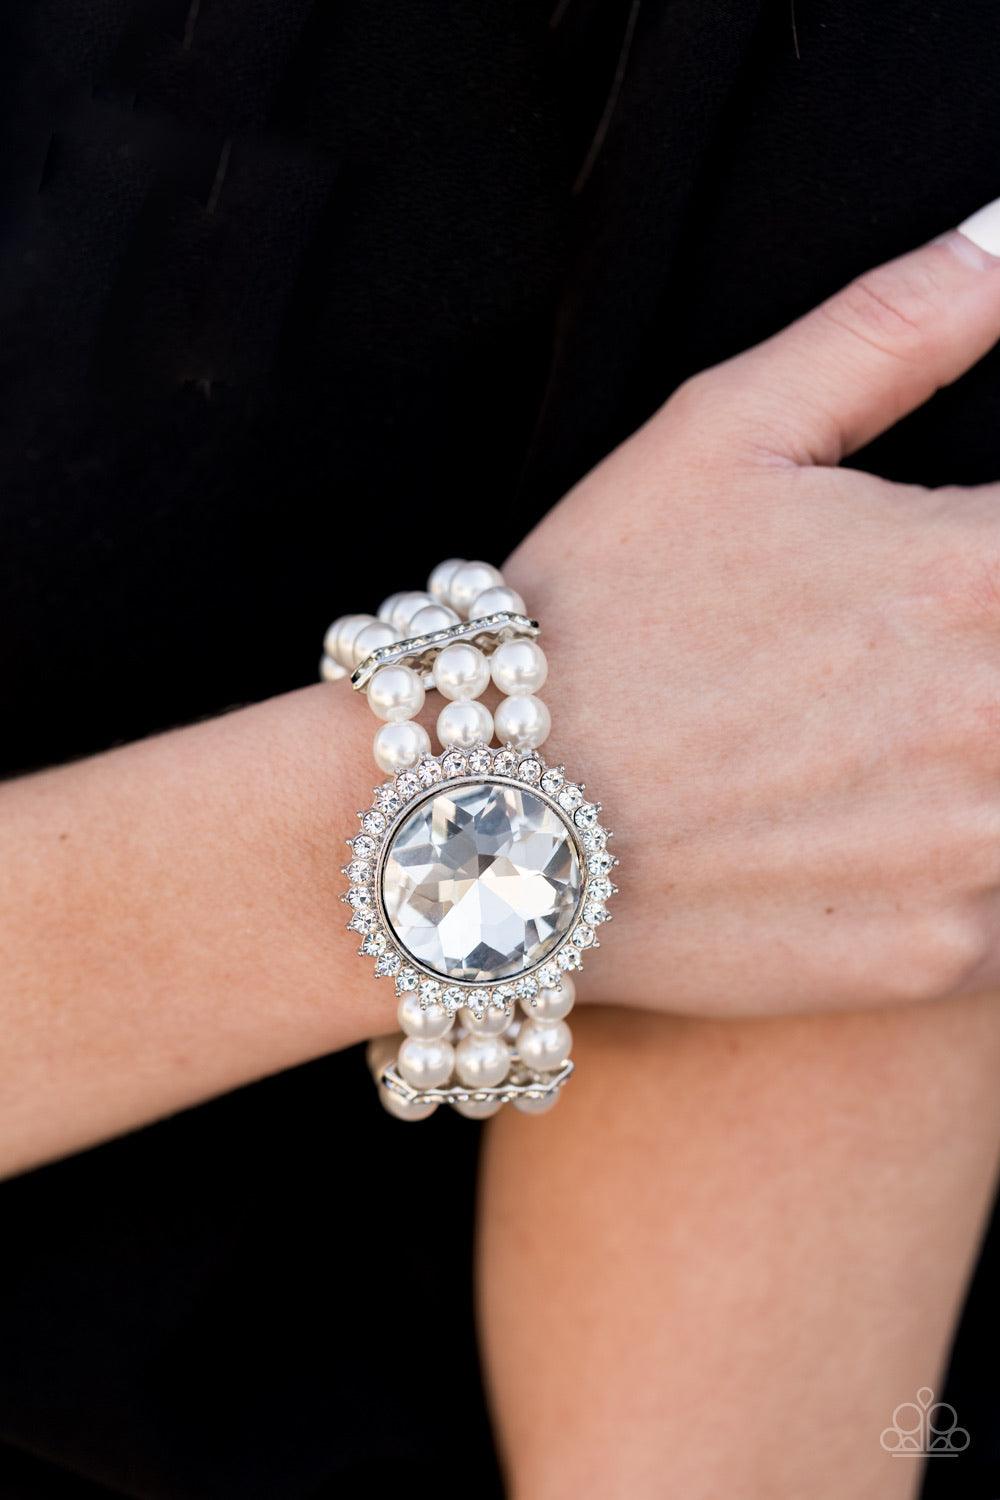 Paparazzi Accessories Speechless Sparkle - White Threaded along stretchy bands, strands of pearly white beads are held in place with white rhinestone encrusted fittings around the wrist. Bedazzled in a ring of glassy white rhinestones, a dramatically over